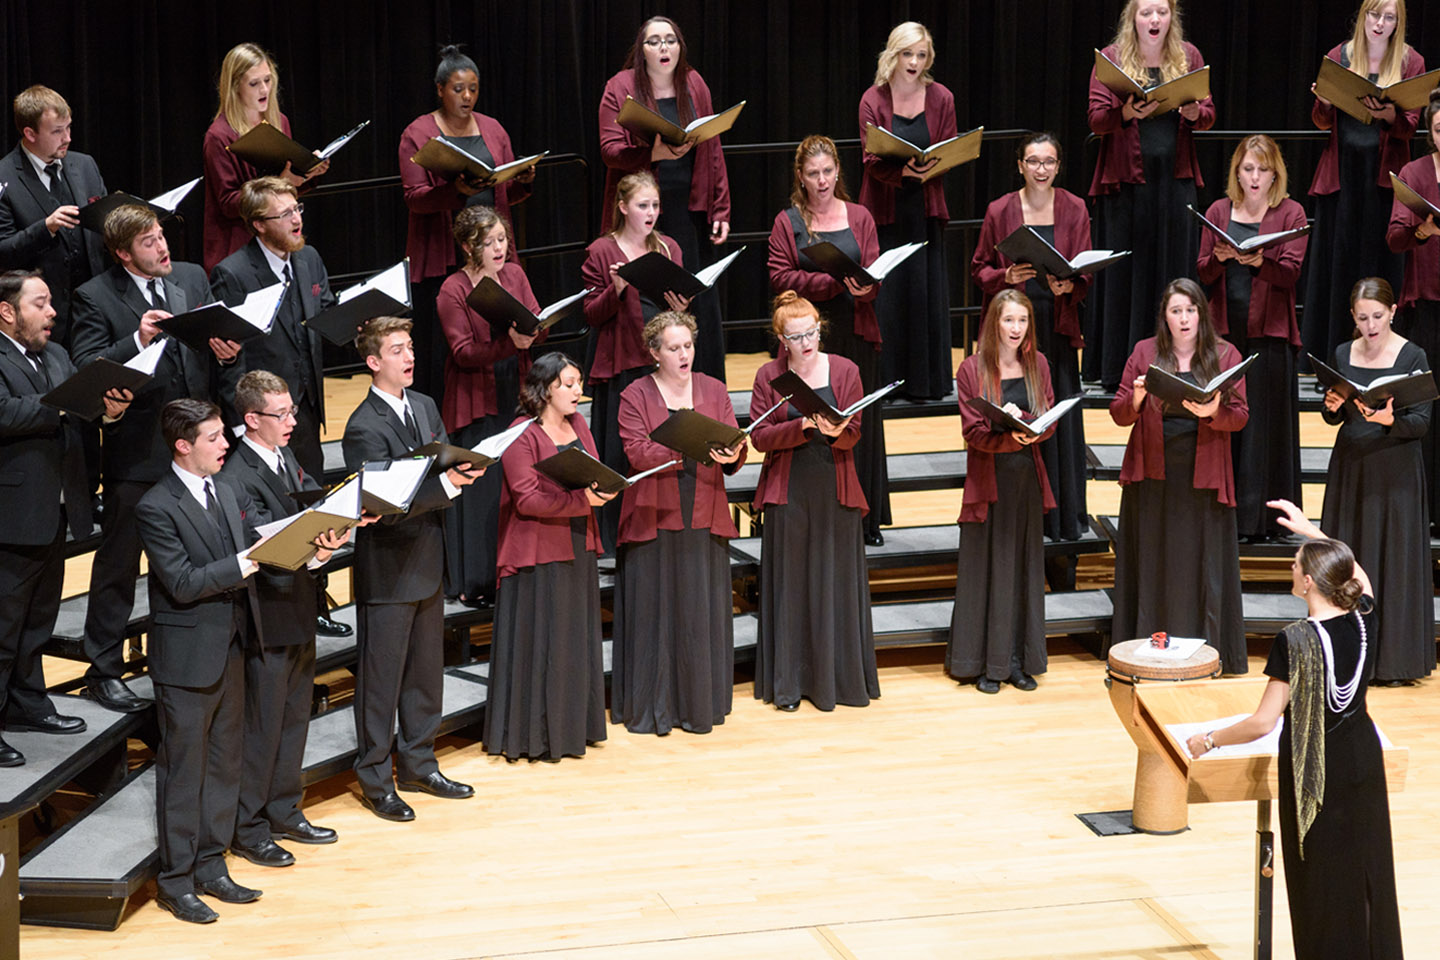 Choral conductor on stage leading MSU Denver Chorale in a performance